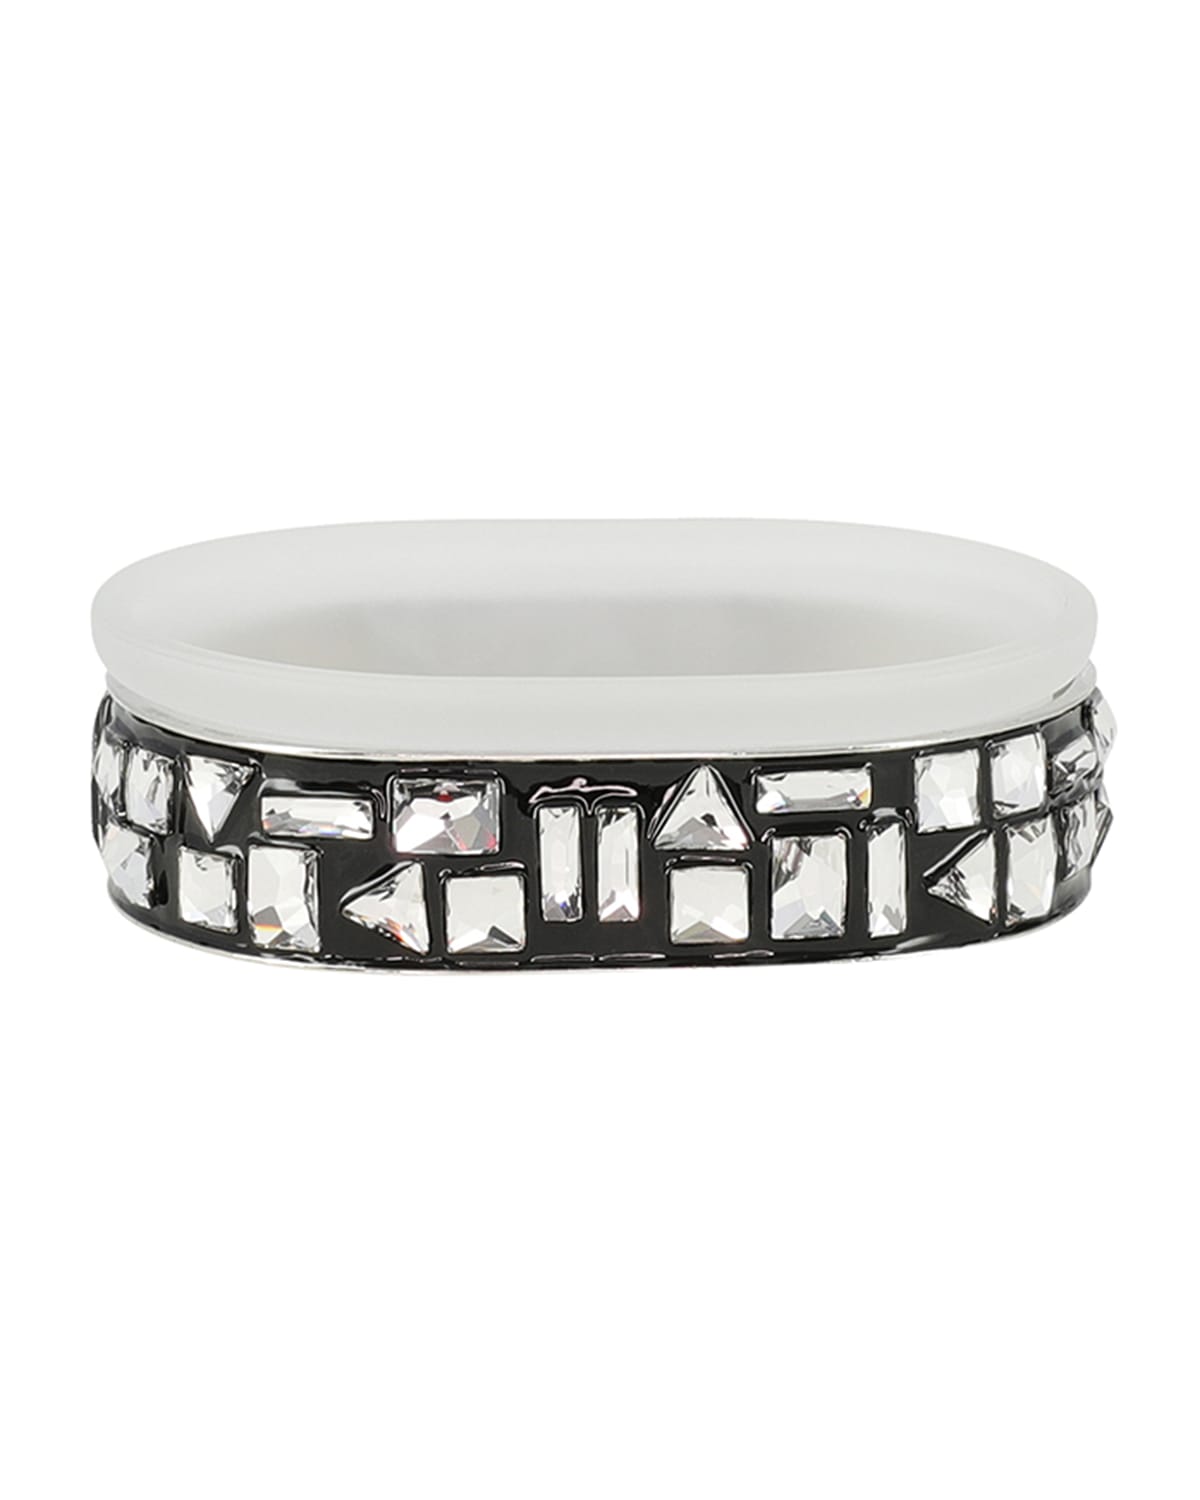 Mike & Ally Budapest Soap Dish With Swarovski Crystals In Black